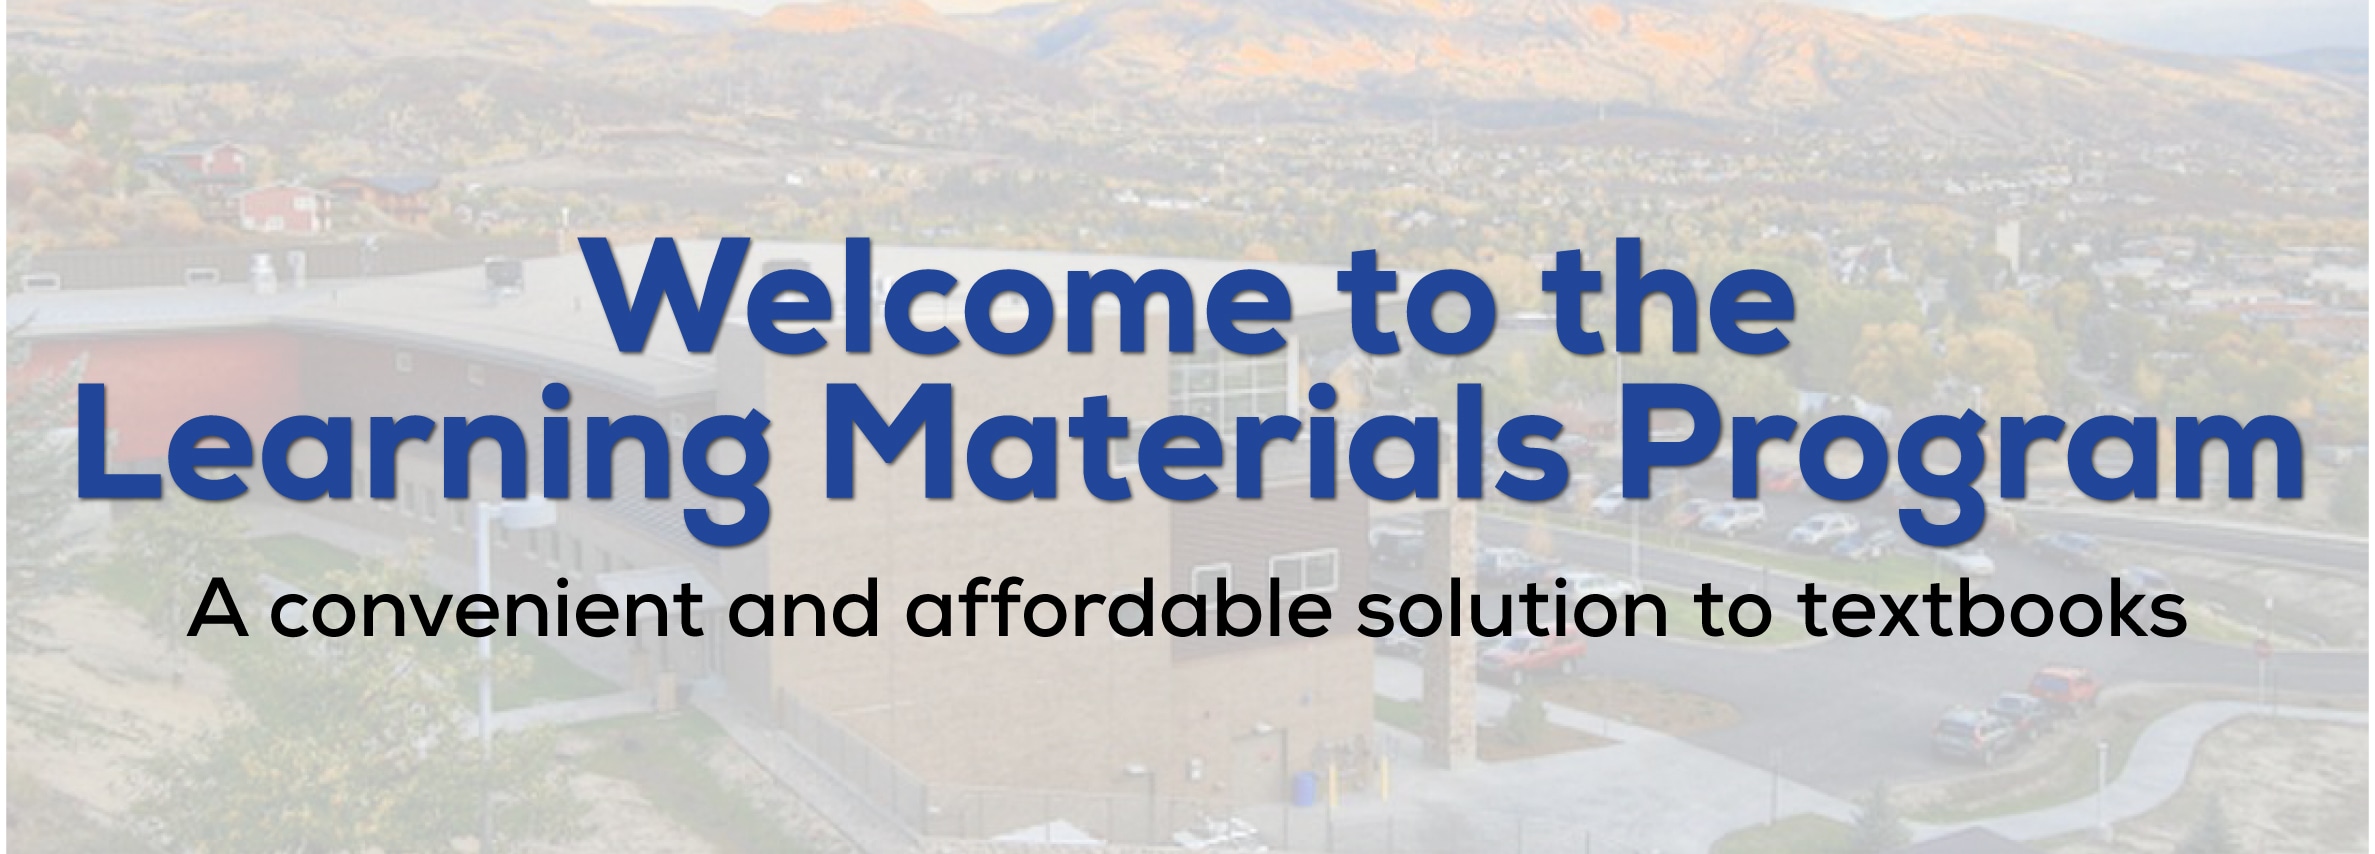 Welcome to the Learning Materials Program, A convenient and affordable solution to textbooks